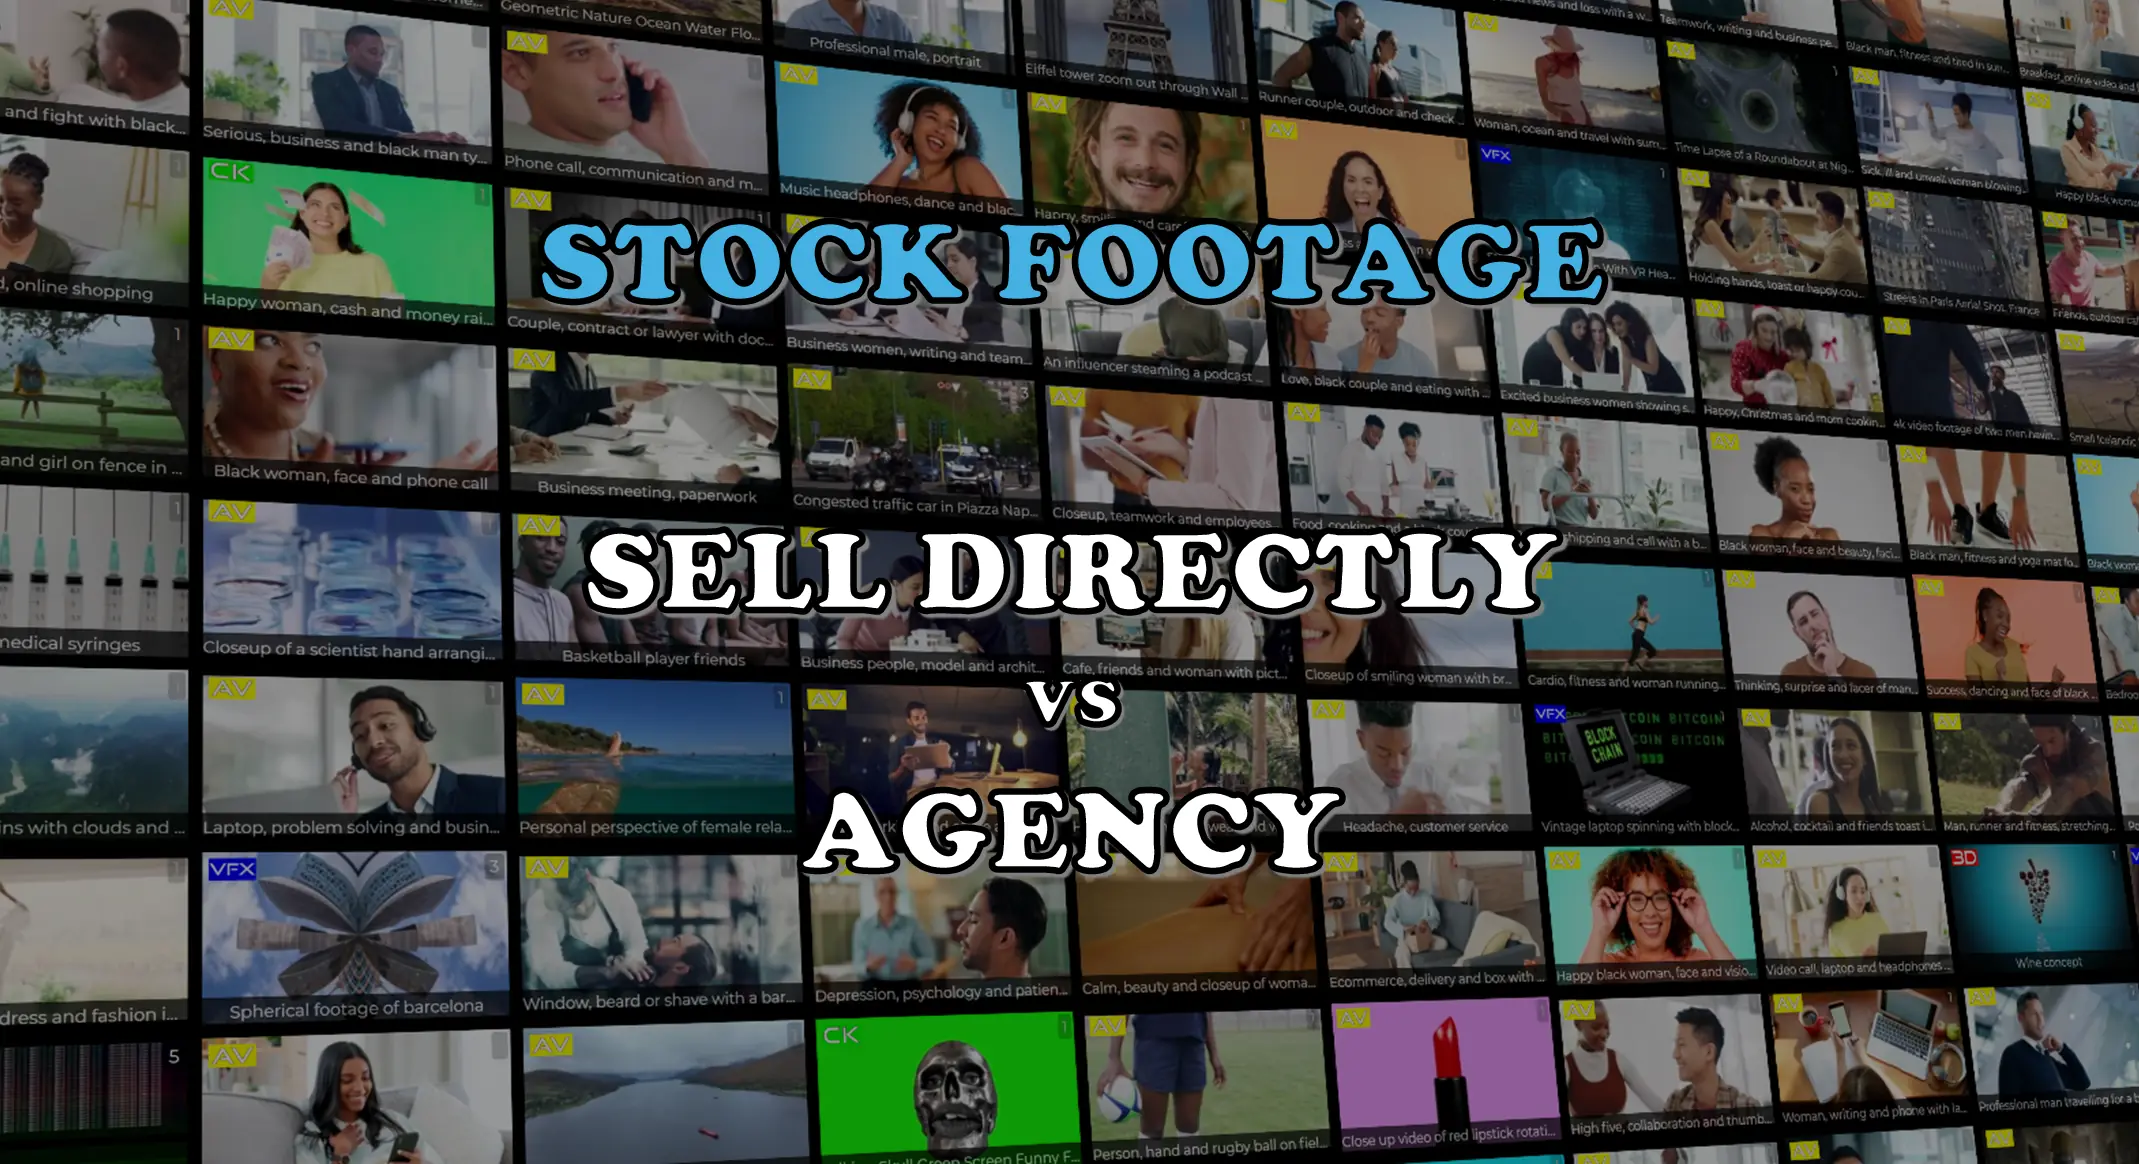 Stock footage: sell directly vs agency